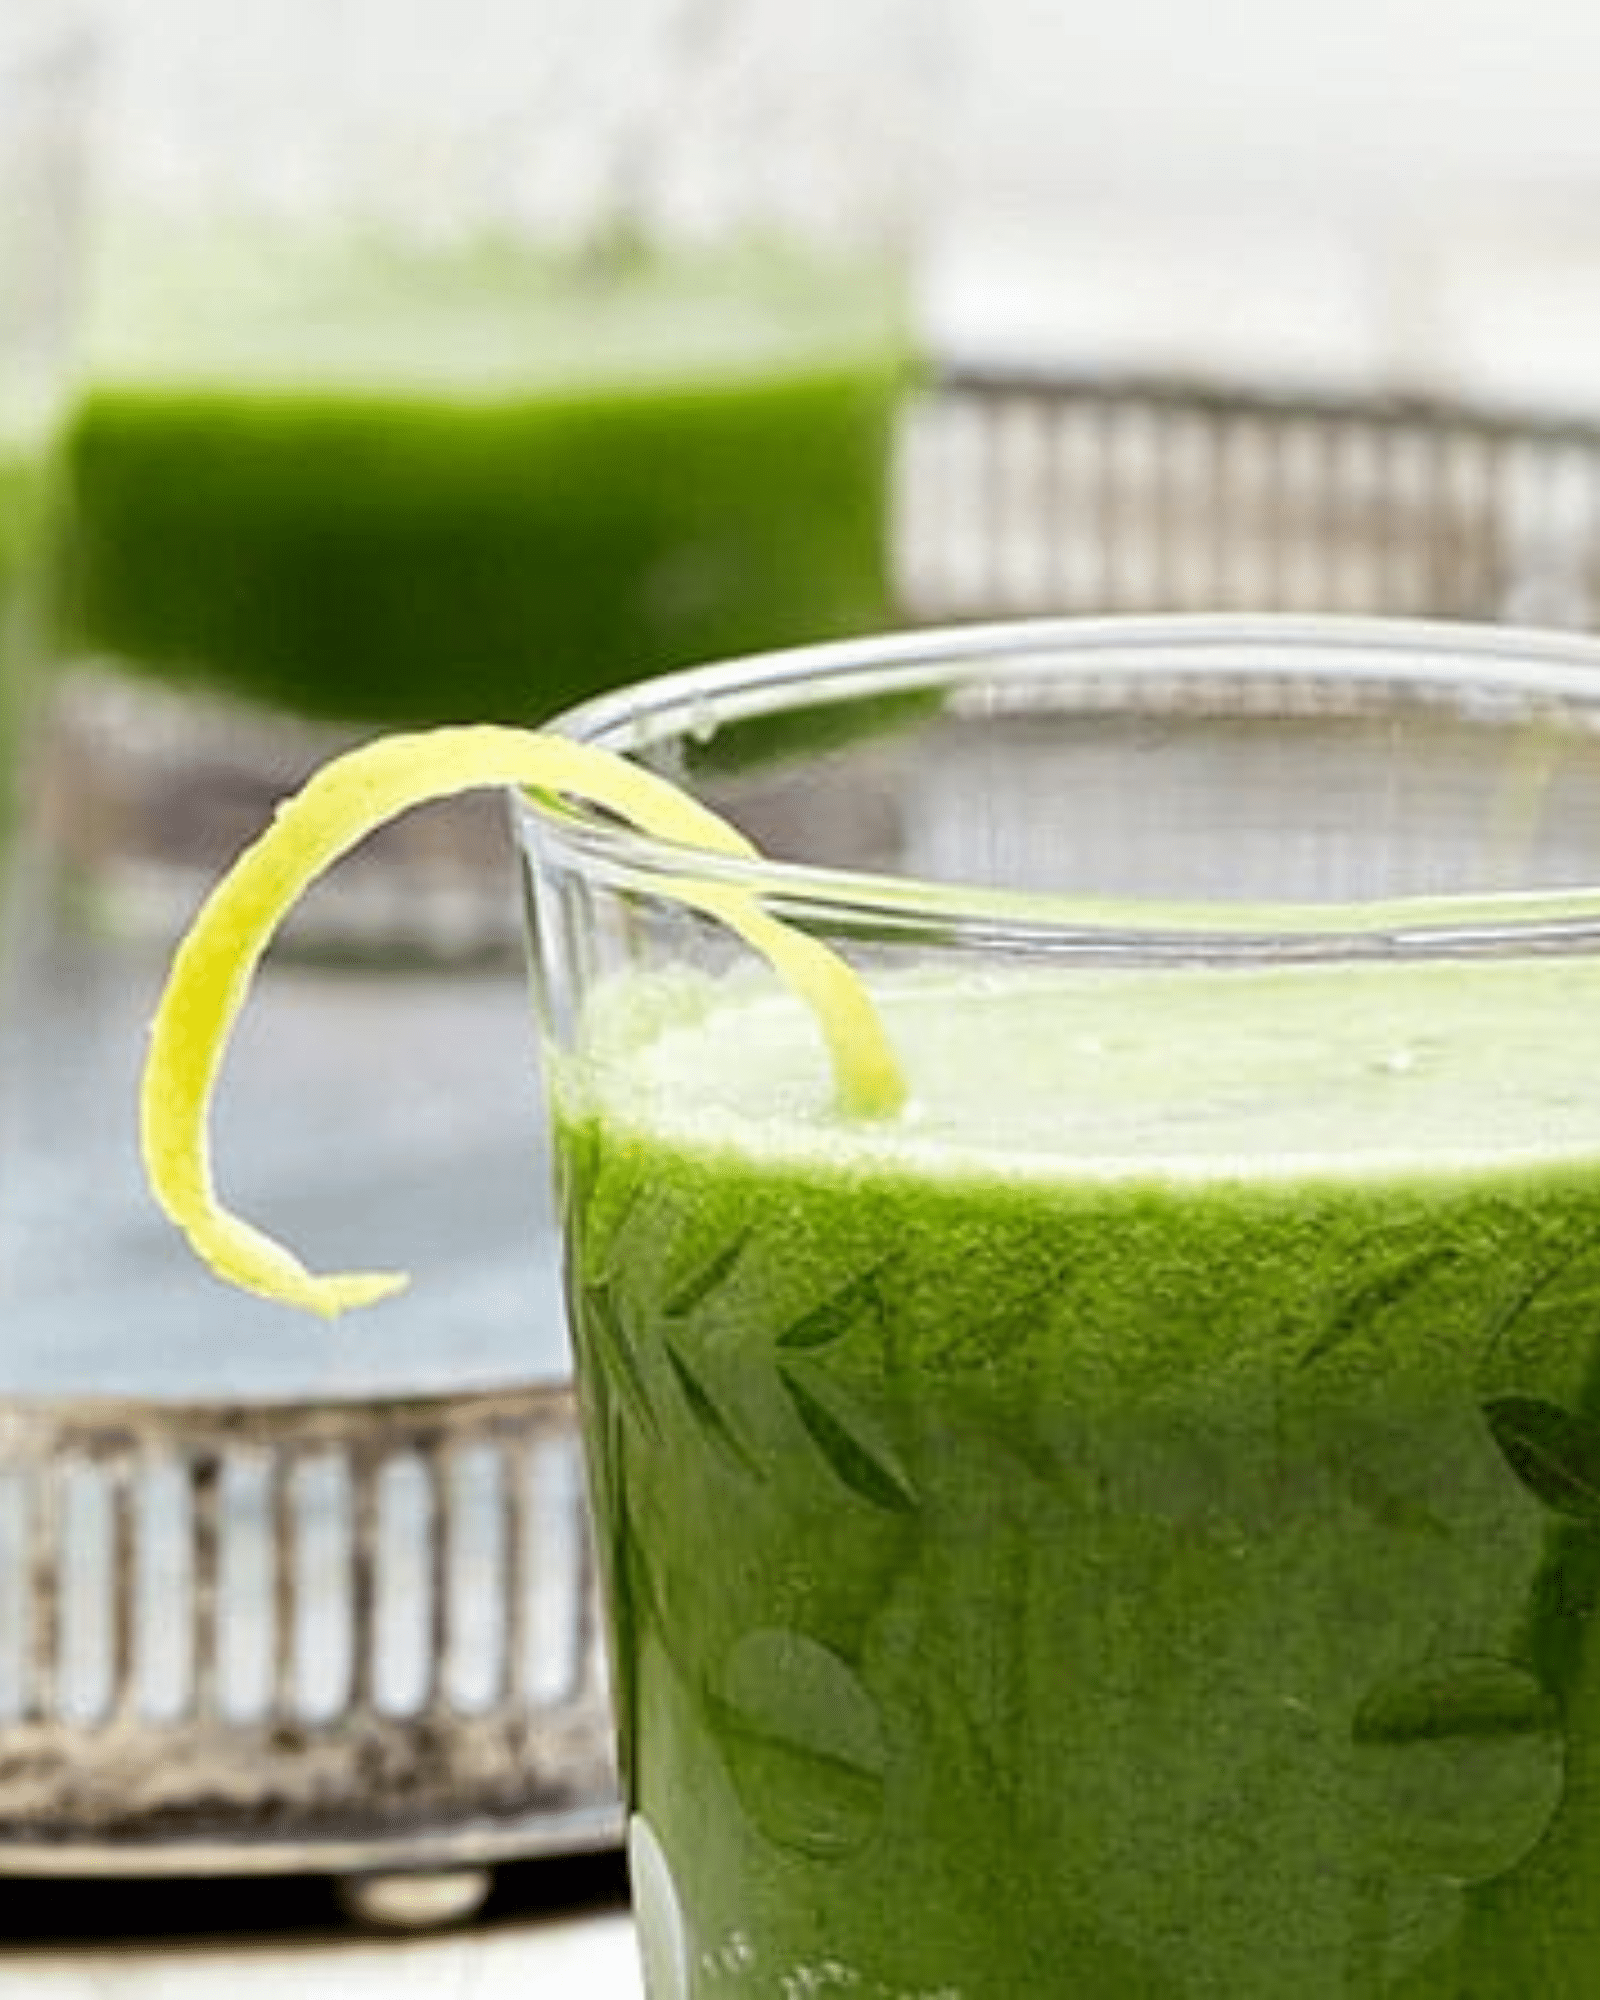 https://kriscarr.com/wp-content/uploads/2013/07/How-to-Make-a-Green-Juice-Video-Recipe-Juicing-FAQs.png